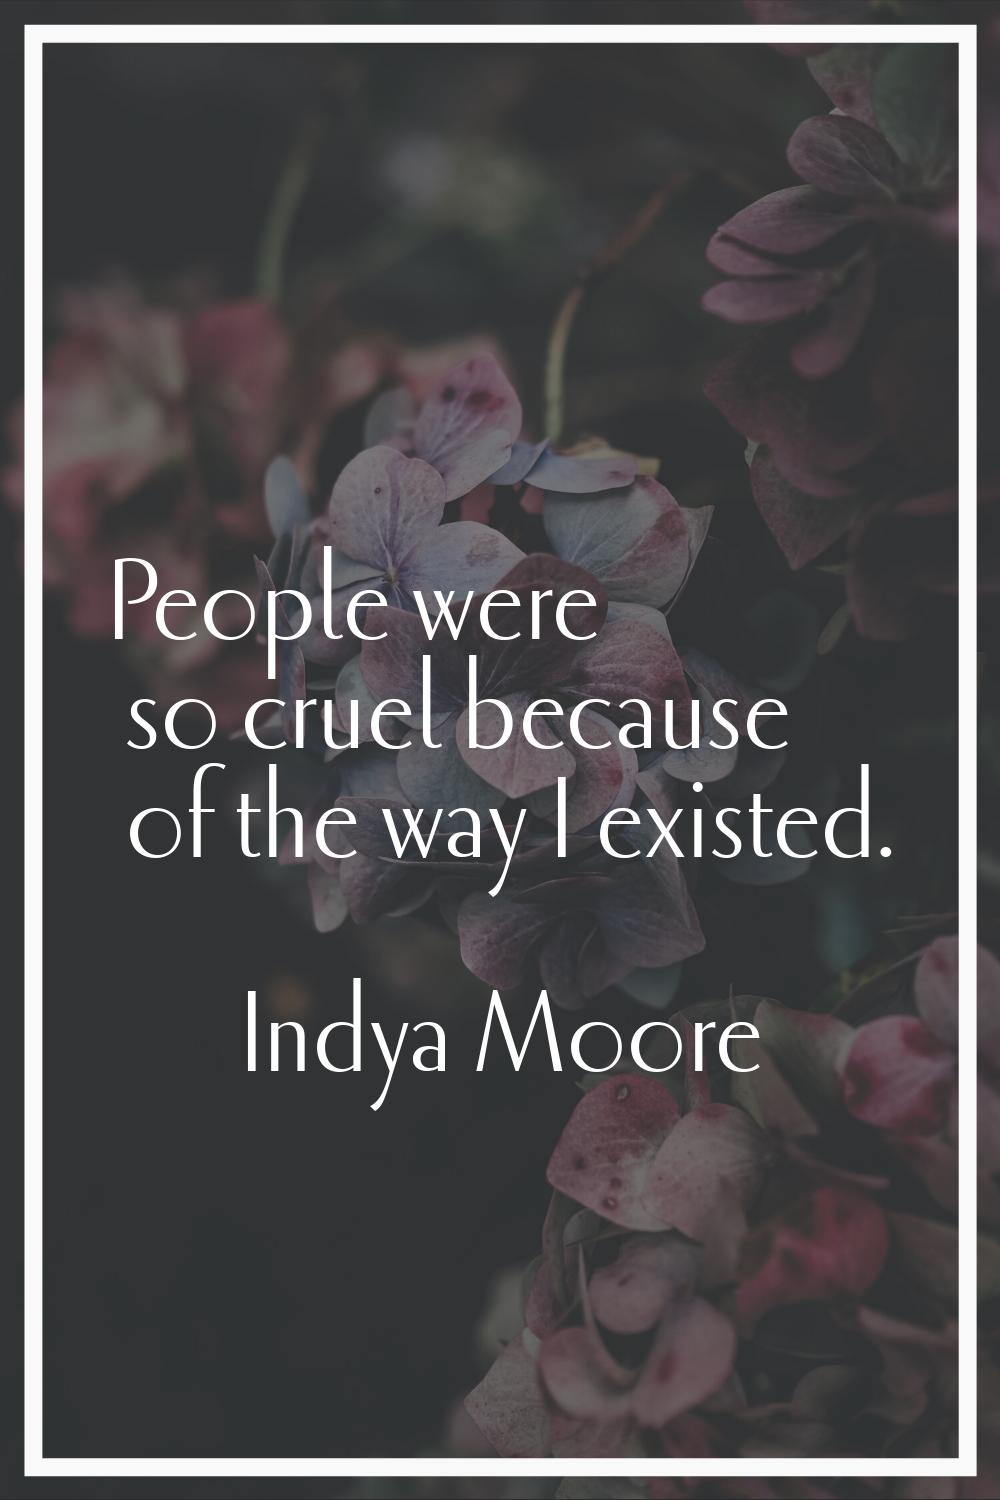 People were so cruel because of the way I existed.